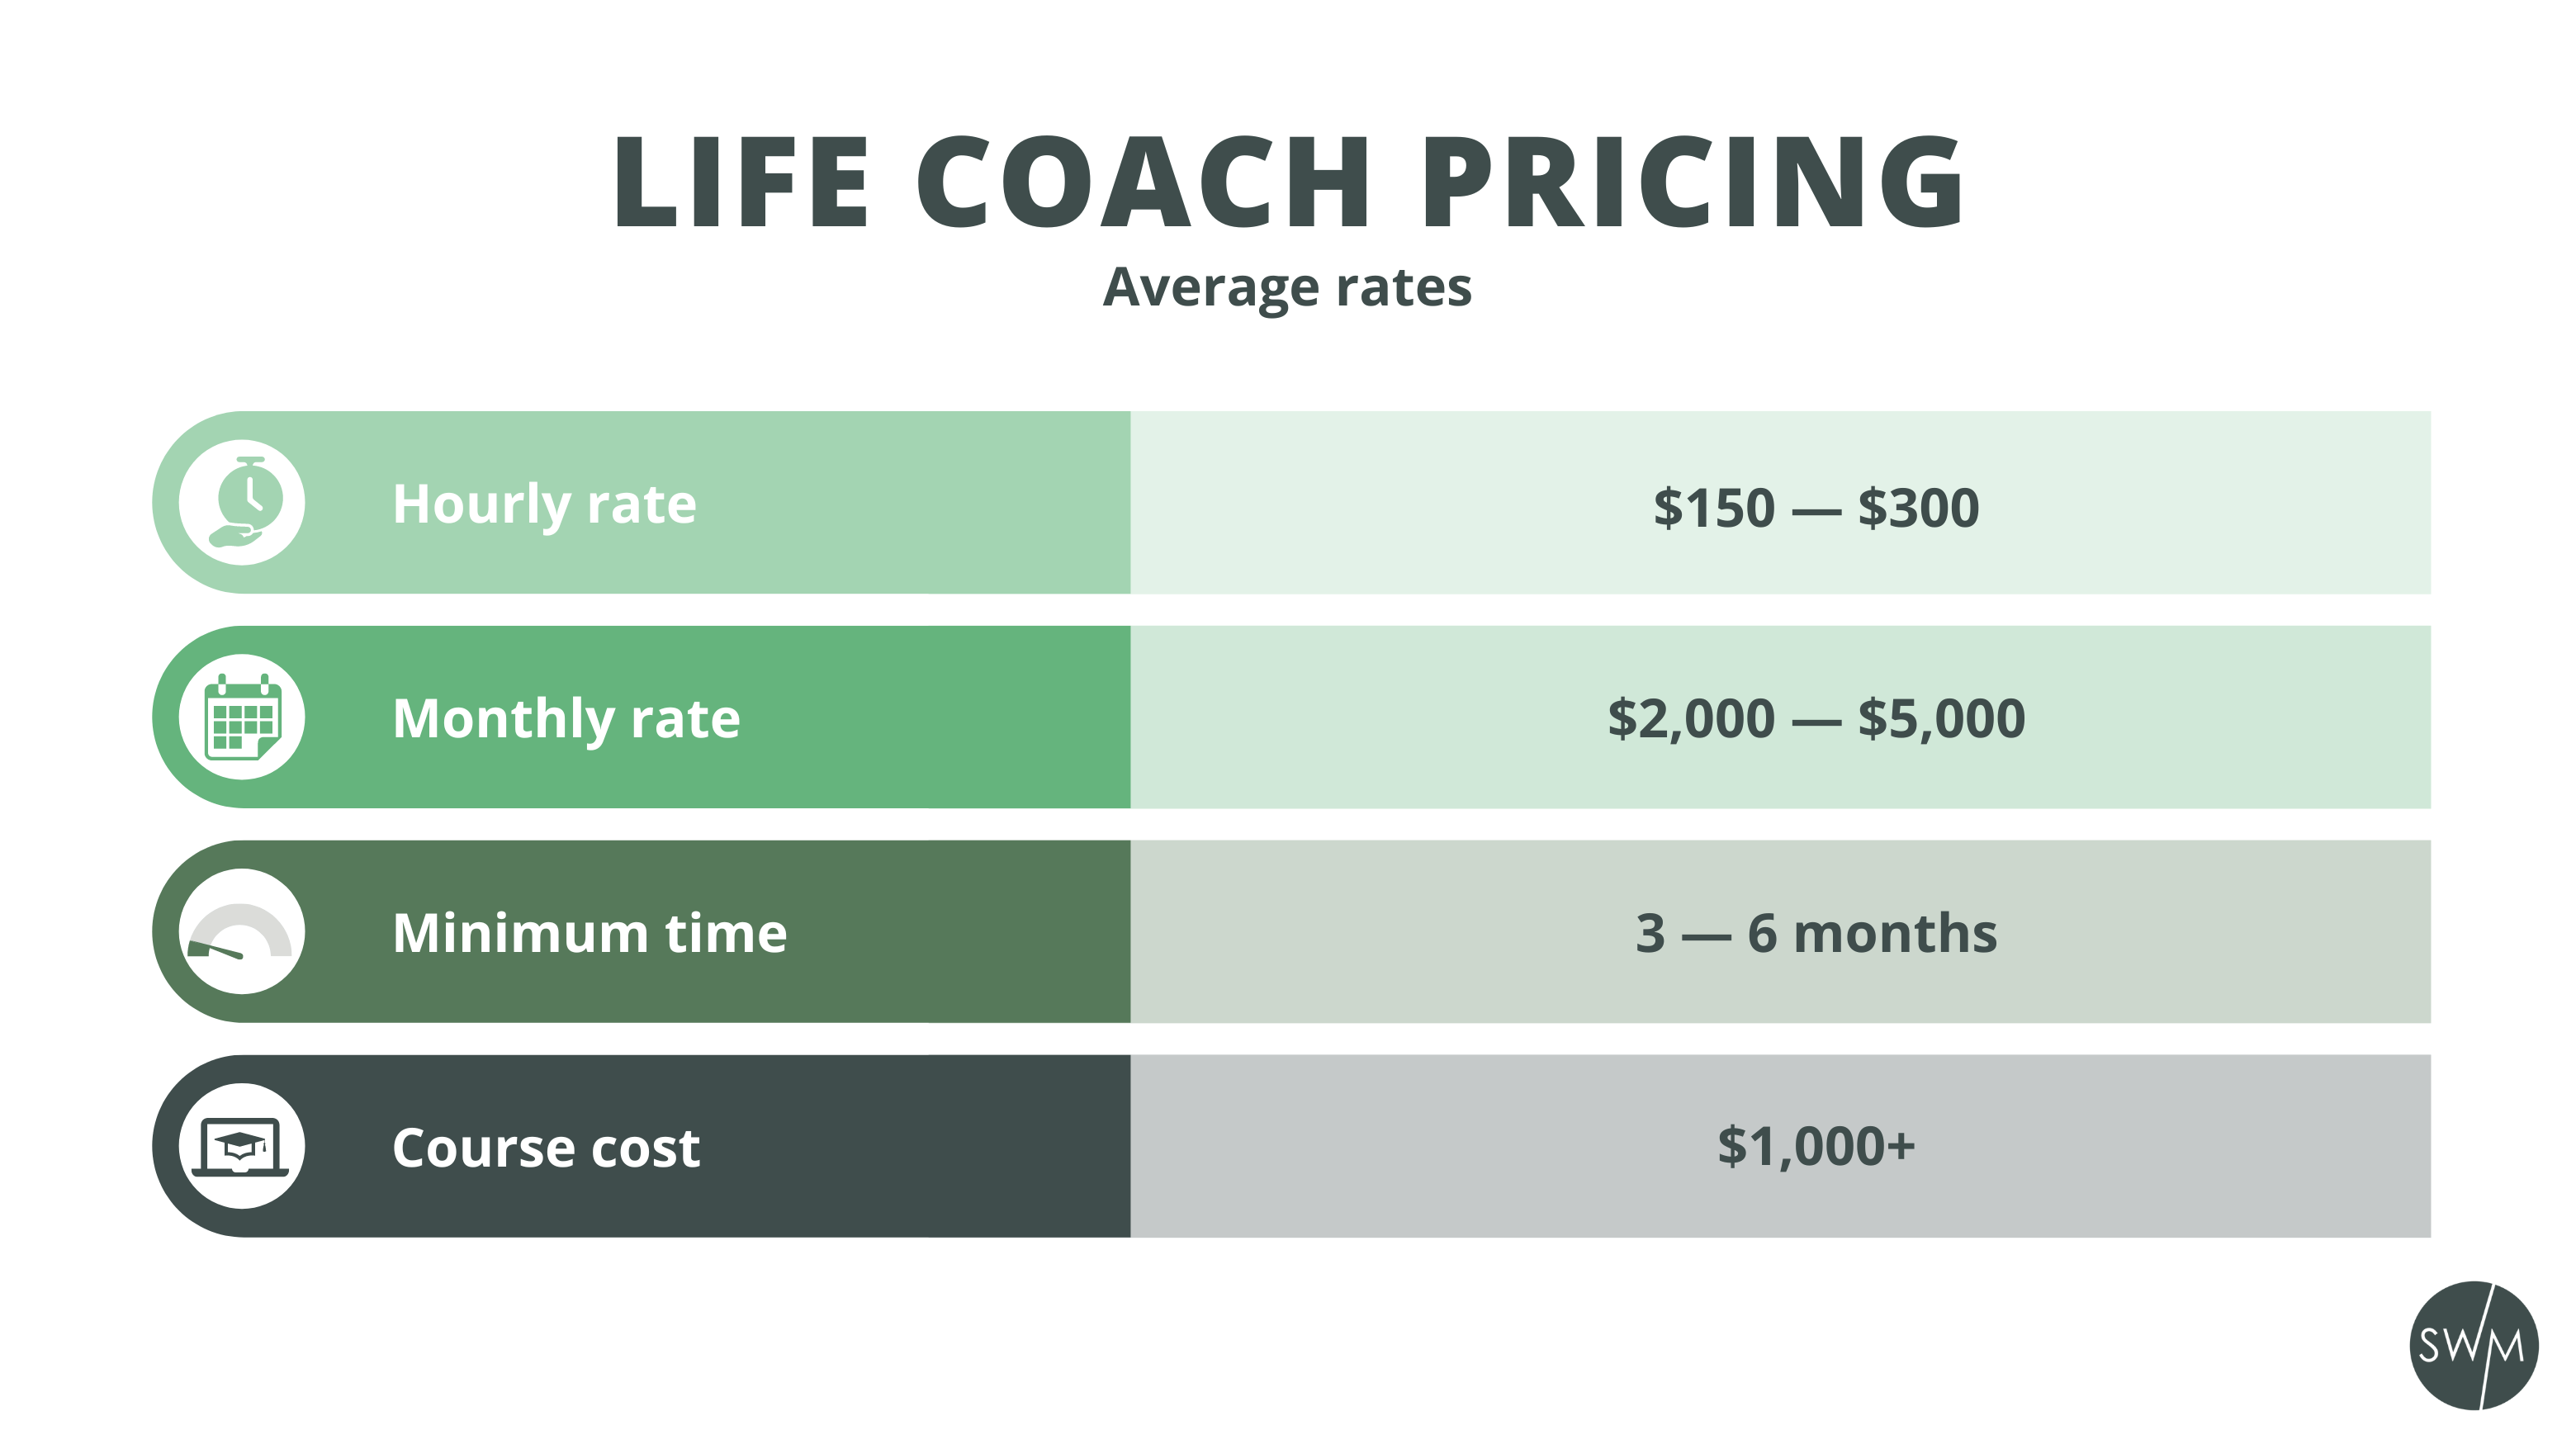 average life coaching hourly, monthly and course rates, and the minimum recommended life coaching time